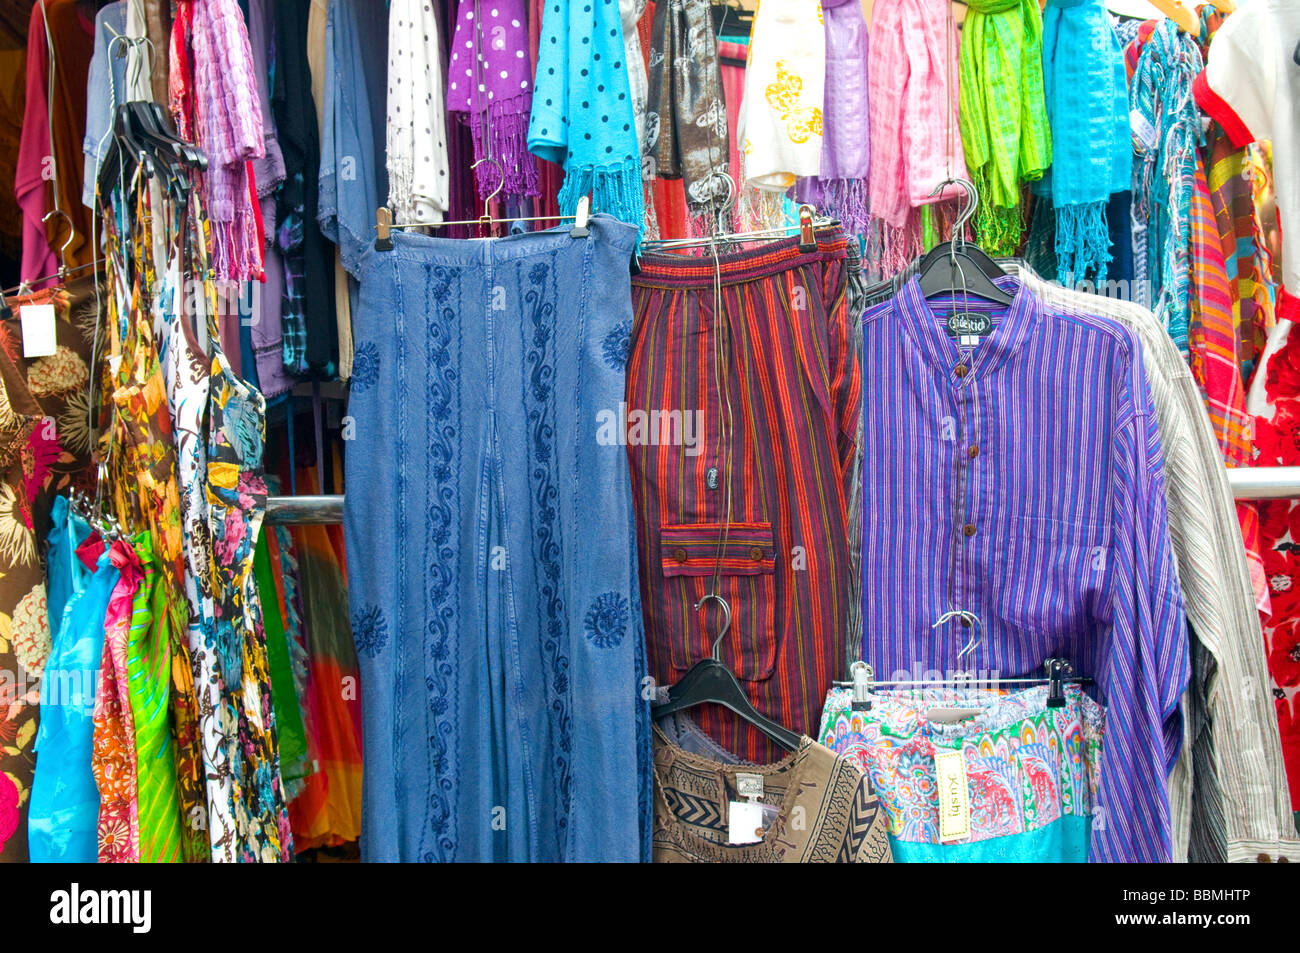 Clothes for sale on market stall, Cambridge Stock Photo - Alamy